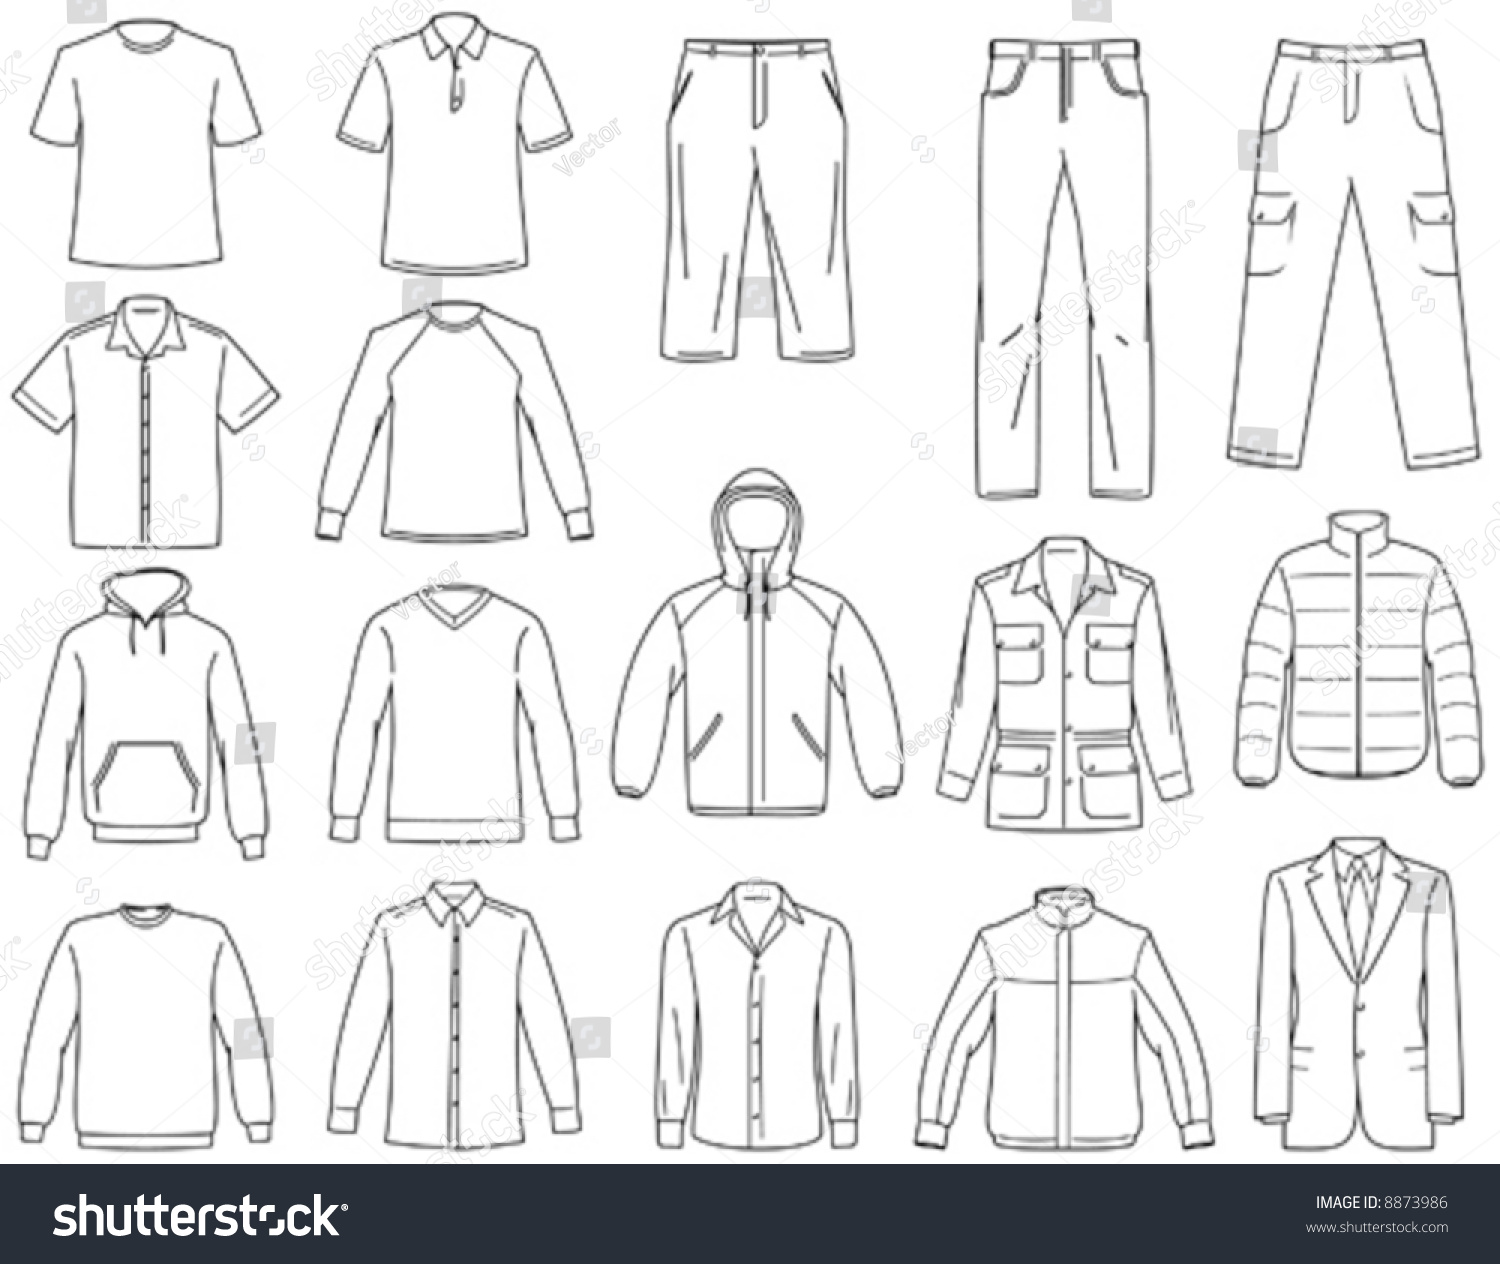 Clothes Illustration Youll Find More Clothes Stock Vector (Royalty Free ...